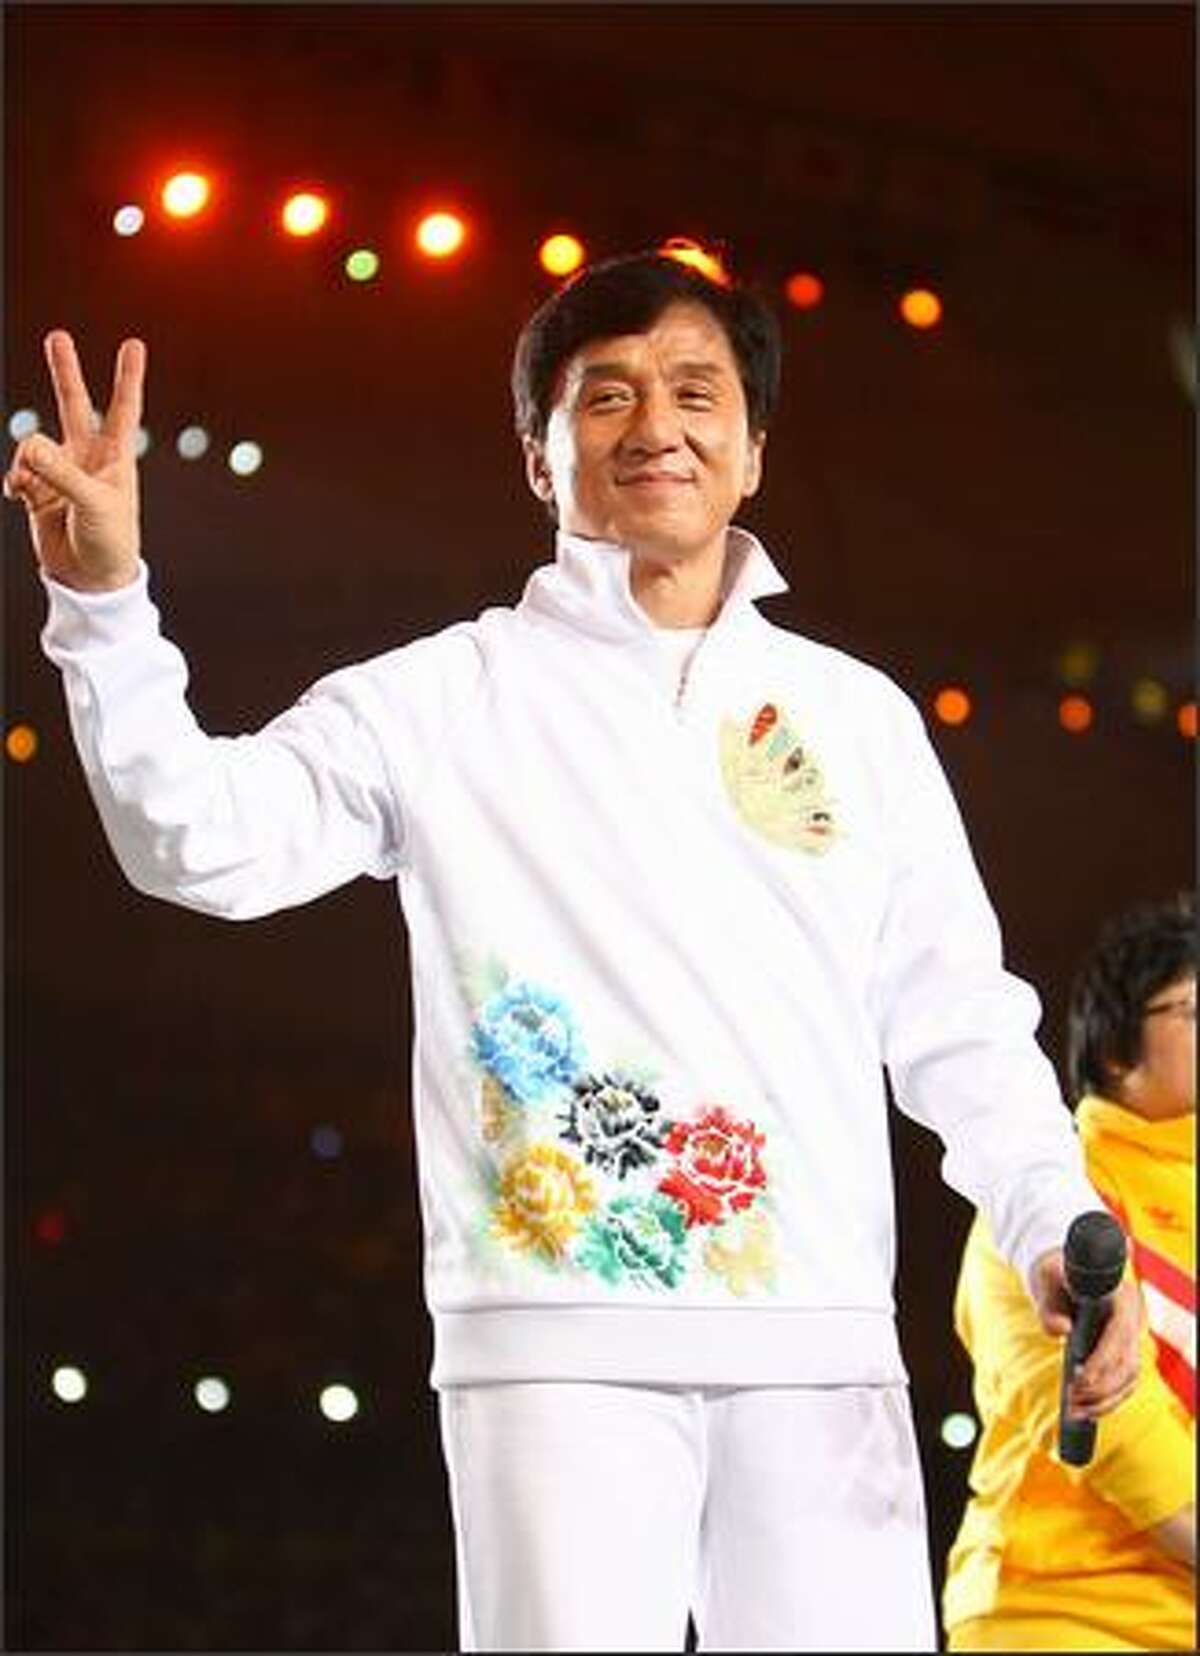 Hong Kong actor Jackie Chan waves to the crowd during the Opening Ceremony for the 2008 Beijing Summer Olympics at the National Stadium on August 8, 2008 in Beijing, China. (Photo by Jeff Gross/Getty Images)